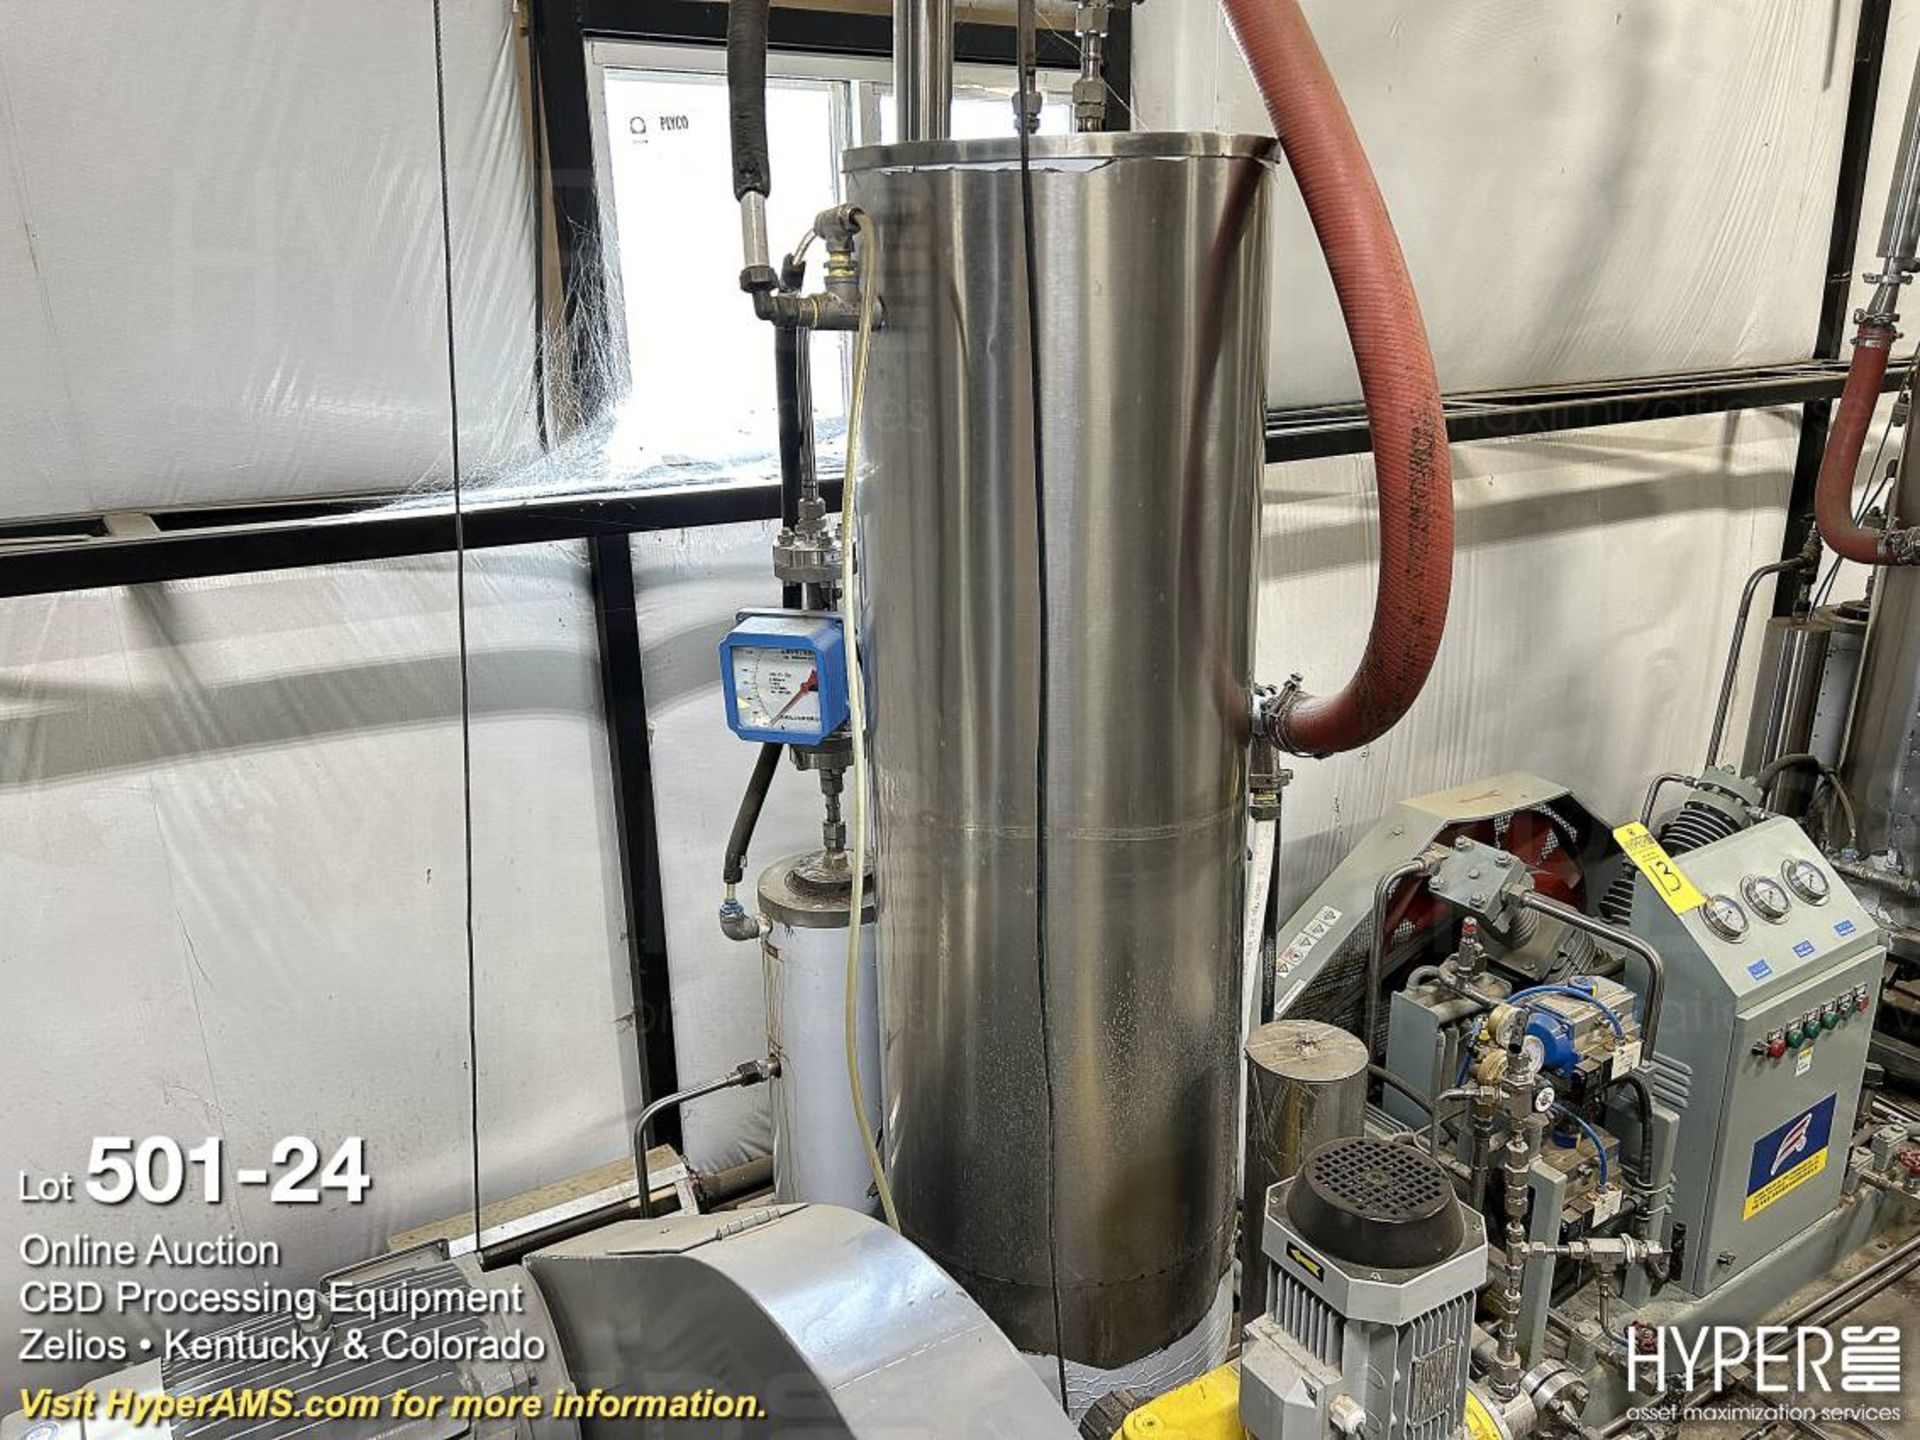 Super Critical 300-Liter C02 Extraction System - Image 24 of 25